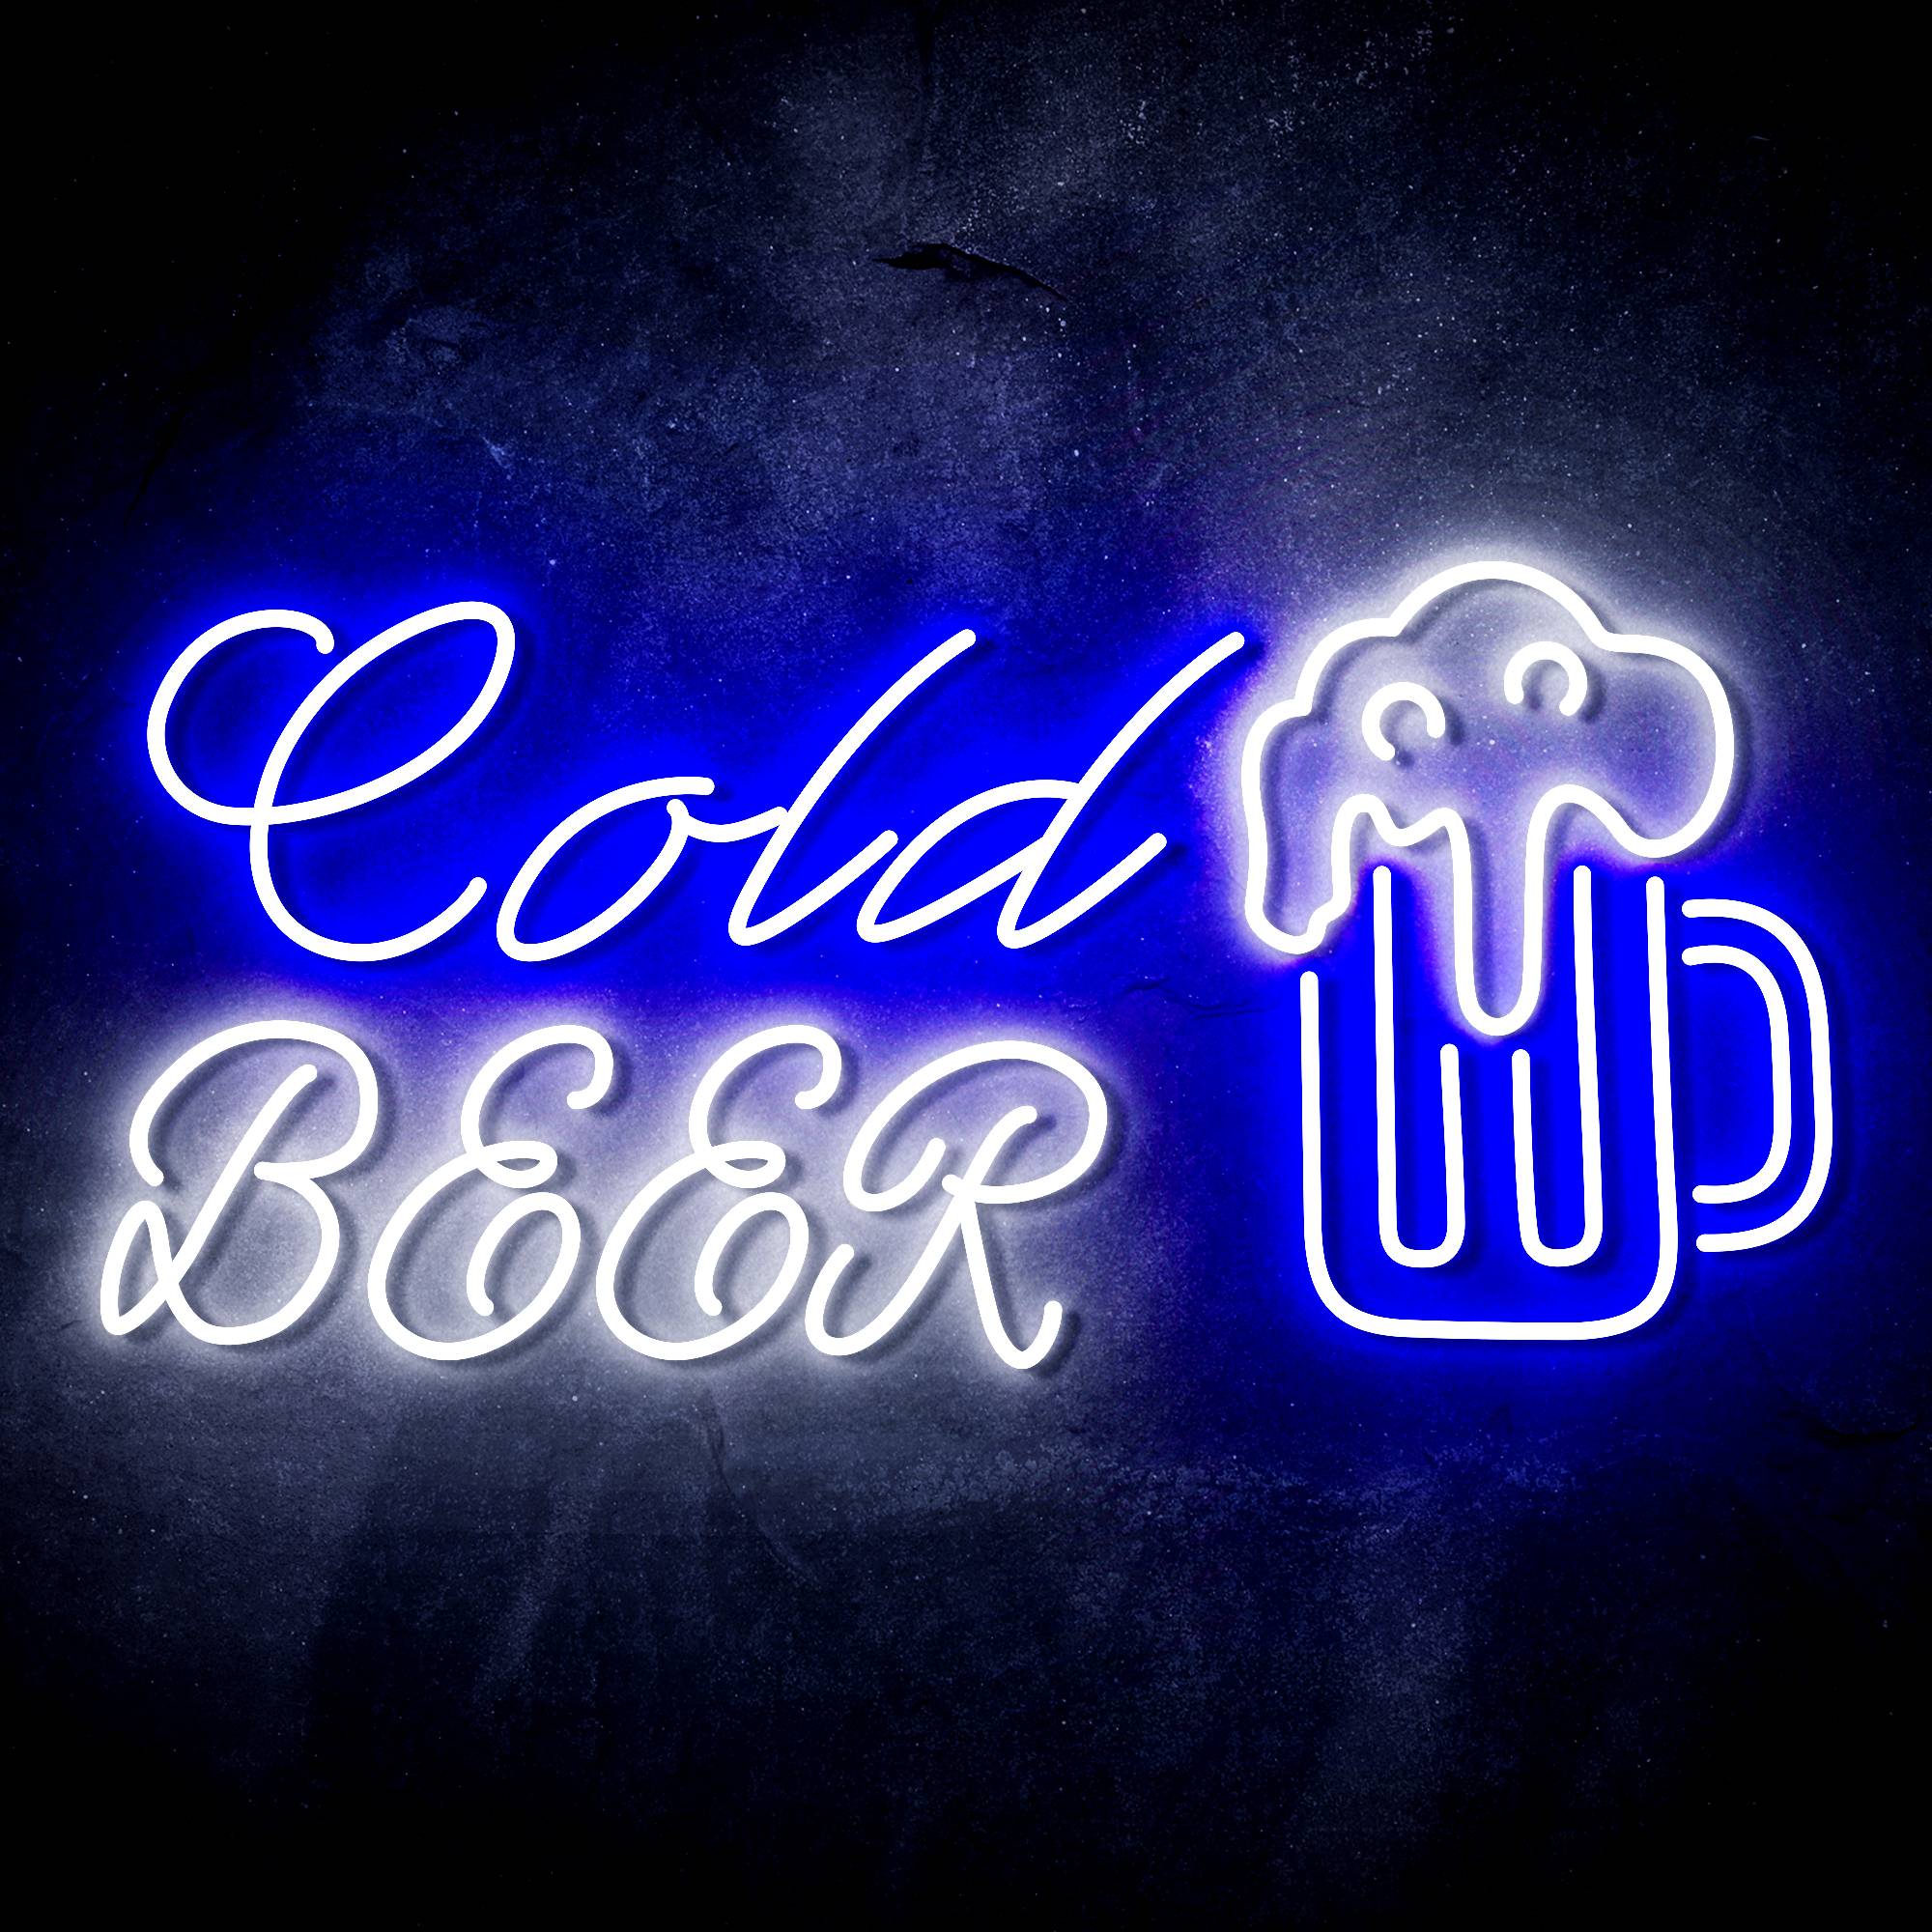 Cold Beer with Beer Mug LED Neon Sign